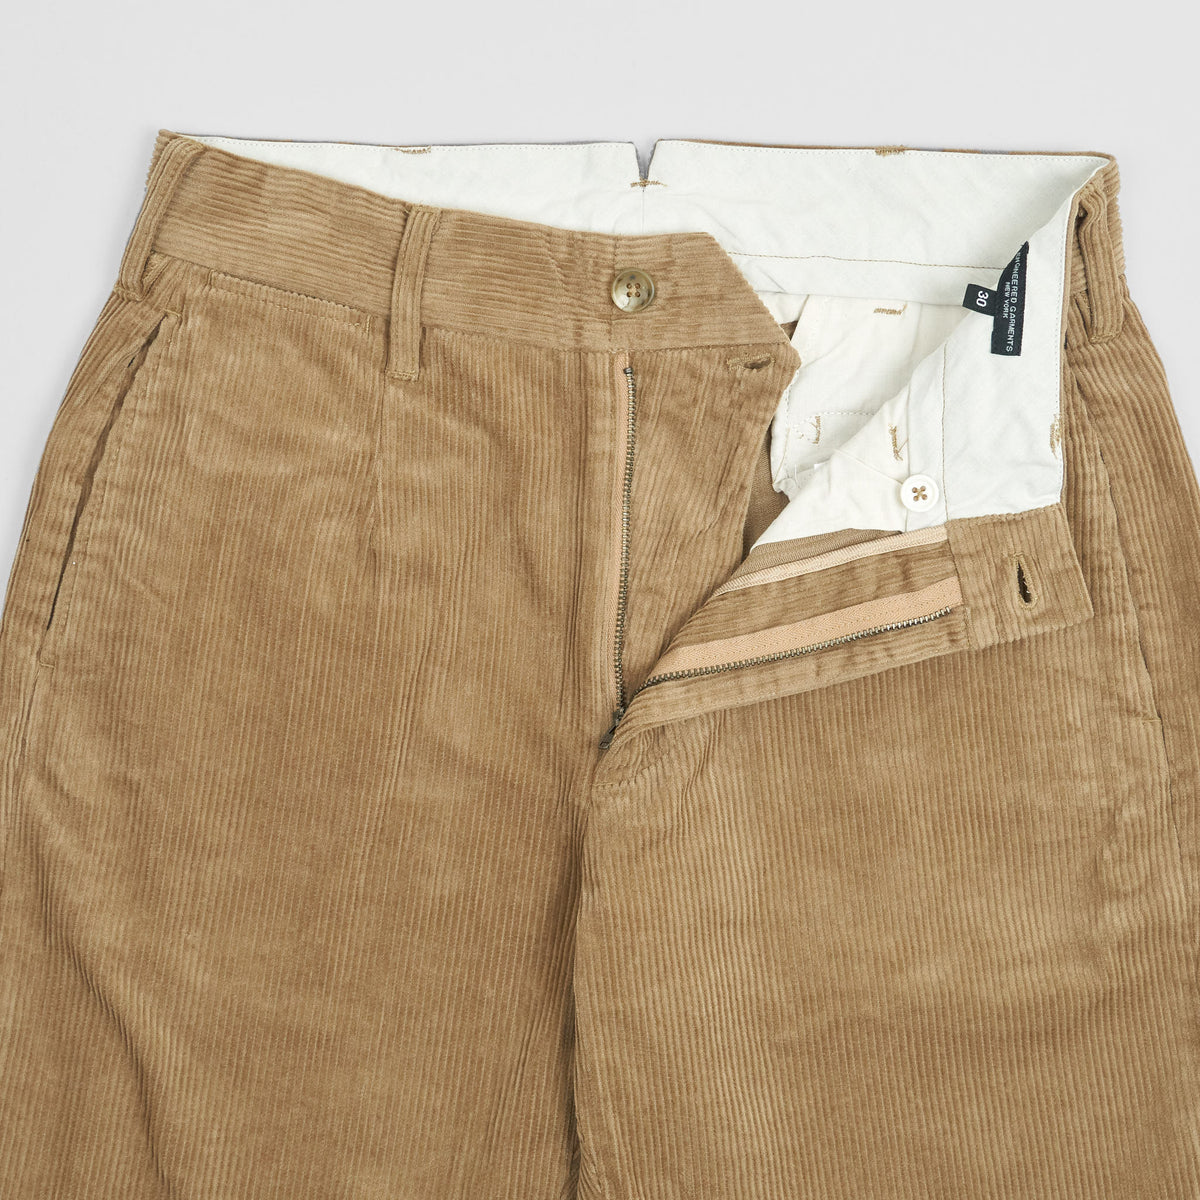 Engineered Garments Corduroy Relaxed Chino Pants